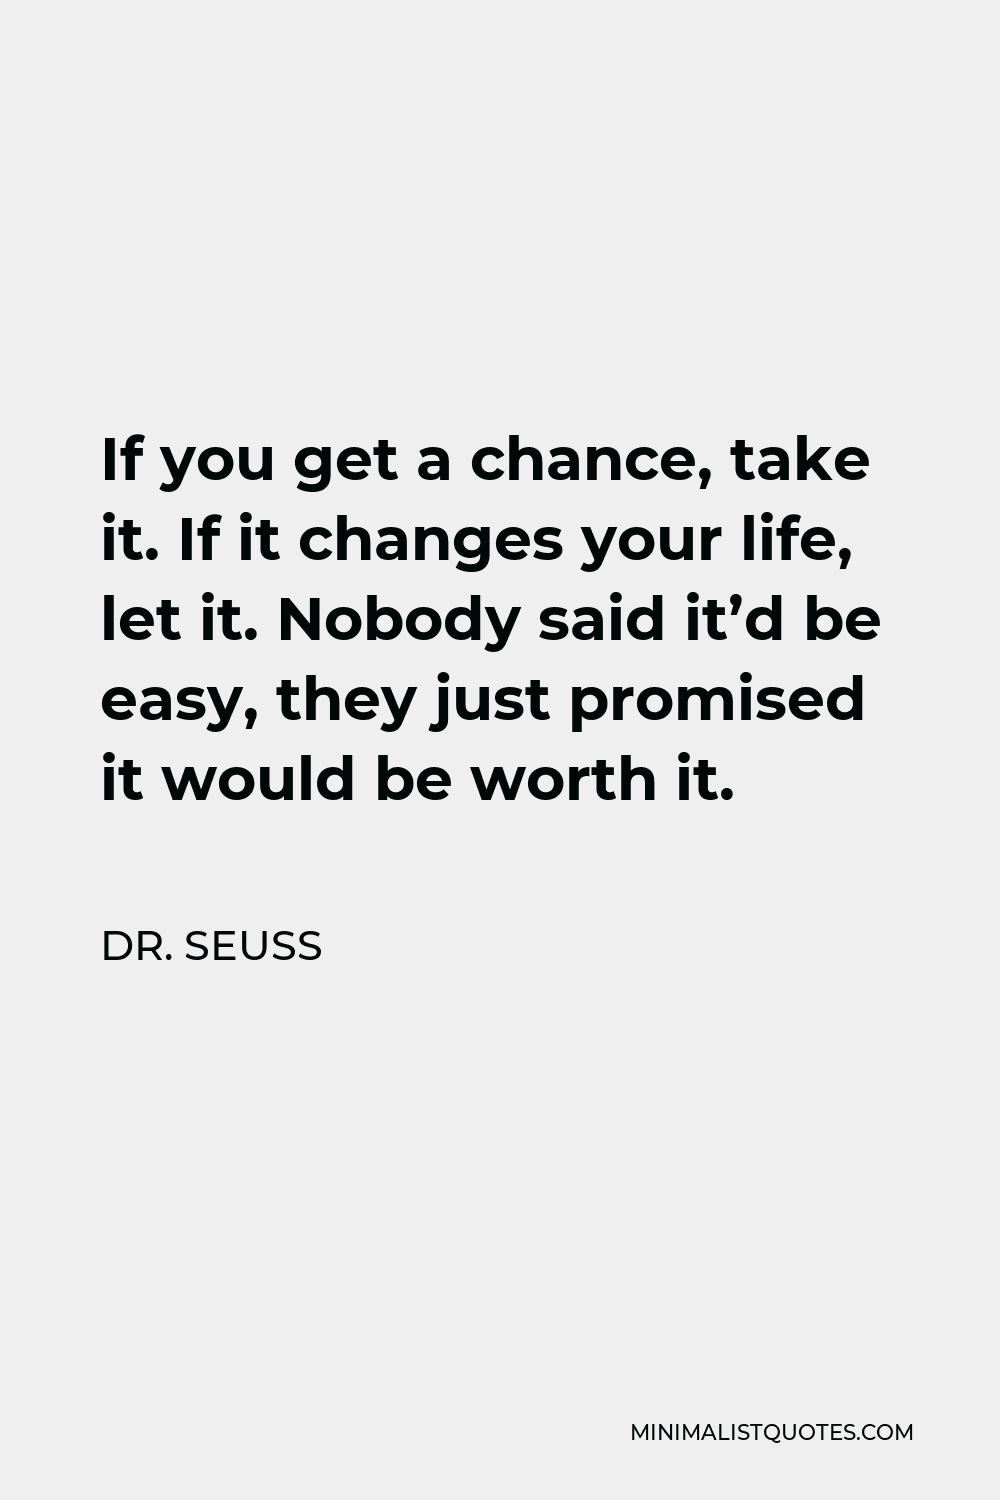 Dr. Seuss Quote - If you get a chance, take it. If it changes your life, let it. Nobody said it’d be easy, they just promised it would be worth it.